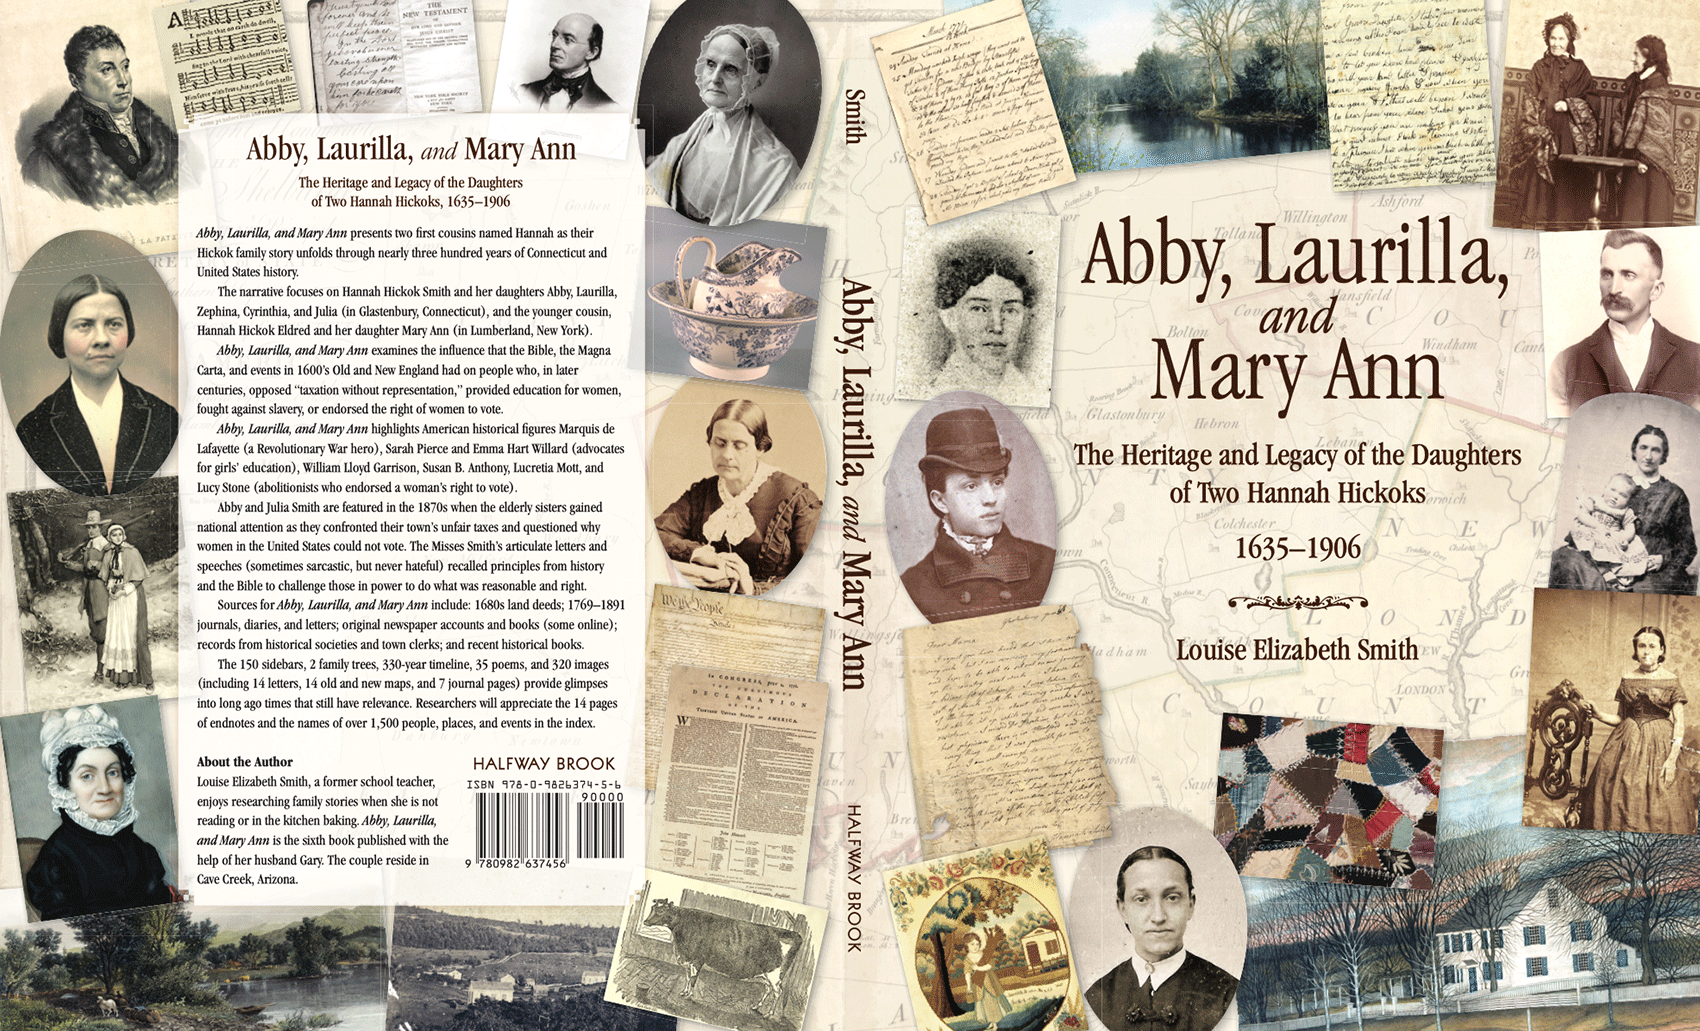 Cover of Abby, Laurilla, and Mary Ann, created by Gary Smith. (Click twice to enlarge the cover.)